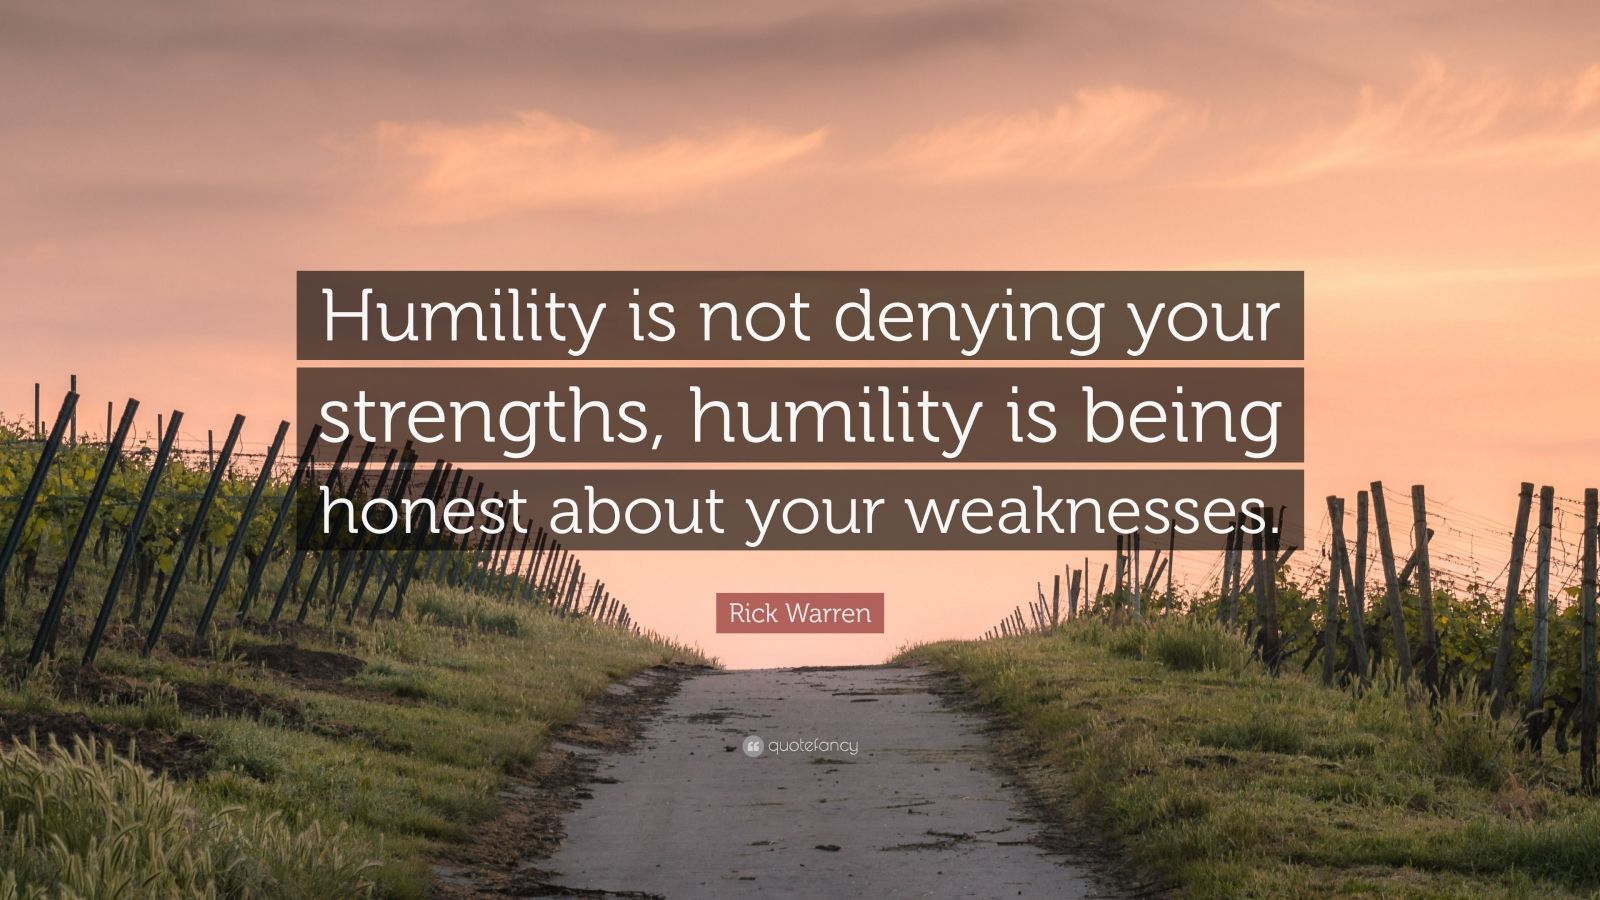 Rick Warren Quote: “Humility is not denying your strengths, humility is